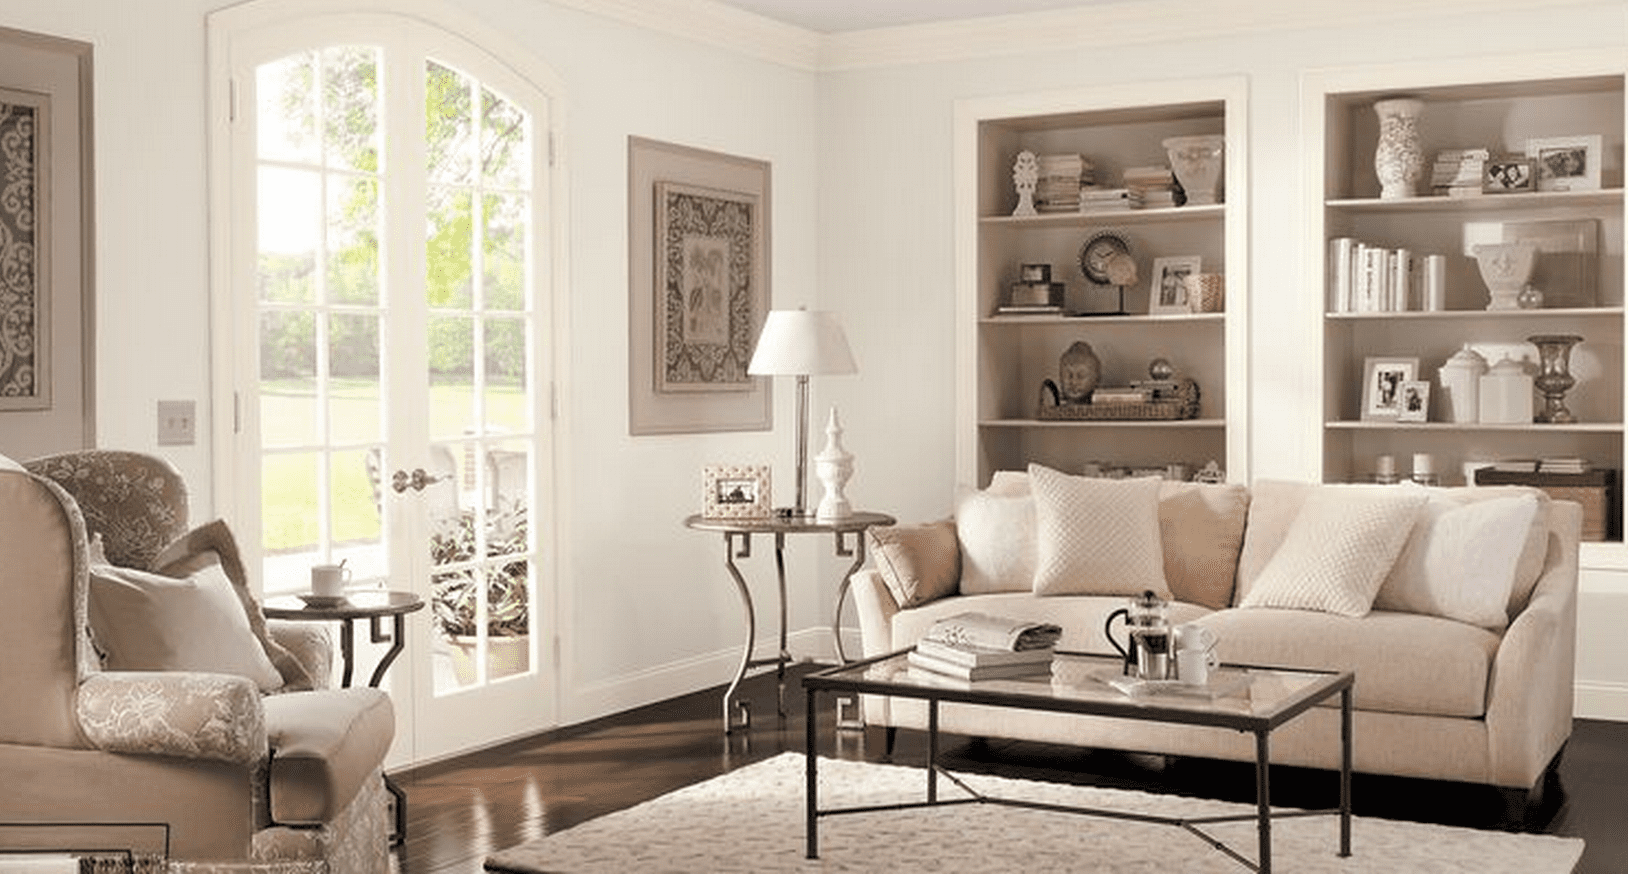 The 6 Best Behr Paints for Family Rooms